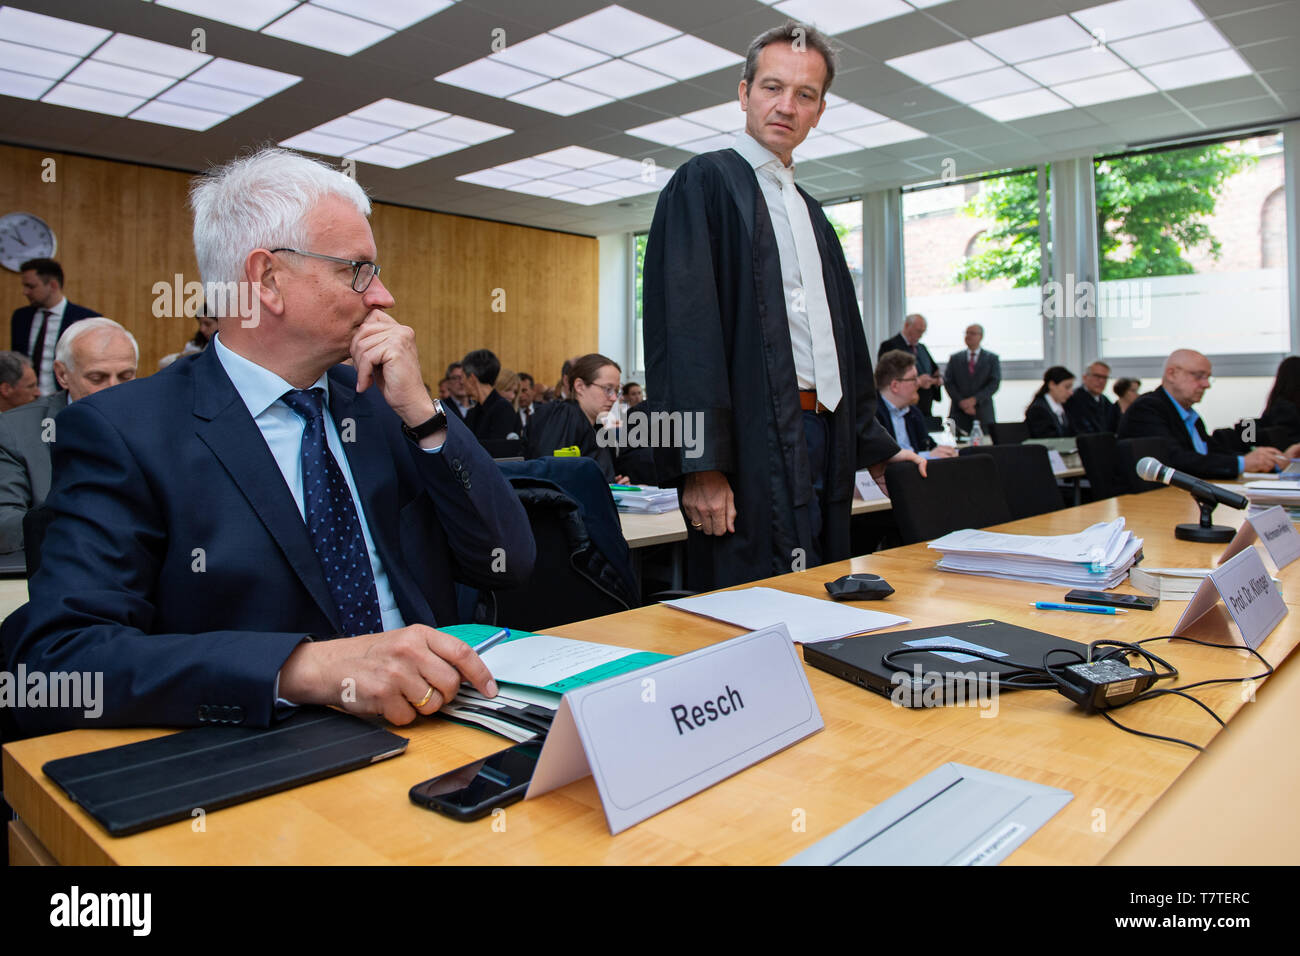 Munster, Germany. 09th May, 2019. 09 May 2019, North Rhine-Westphalia, Münster: Jürgen Resch (l), Federal Managing Director of Deutsche Umwelthilfe and lawyer Remo Klinger, who represents Deutsche Umwelthilfe, stand before the Higher Administrative Court in Münster. The two-day discussion session at the Higher Administrative Court of North Rhine-Westphalia deals with the complaints of Deutsche Umwelthilfe regarding driving bans for Aachen, Bonn and Cologne. The court wants to discuss with the help of experts how the measures demanded by the plaintiff for the observance of the limit values for  Stock Photo